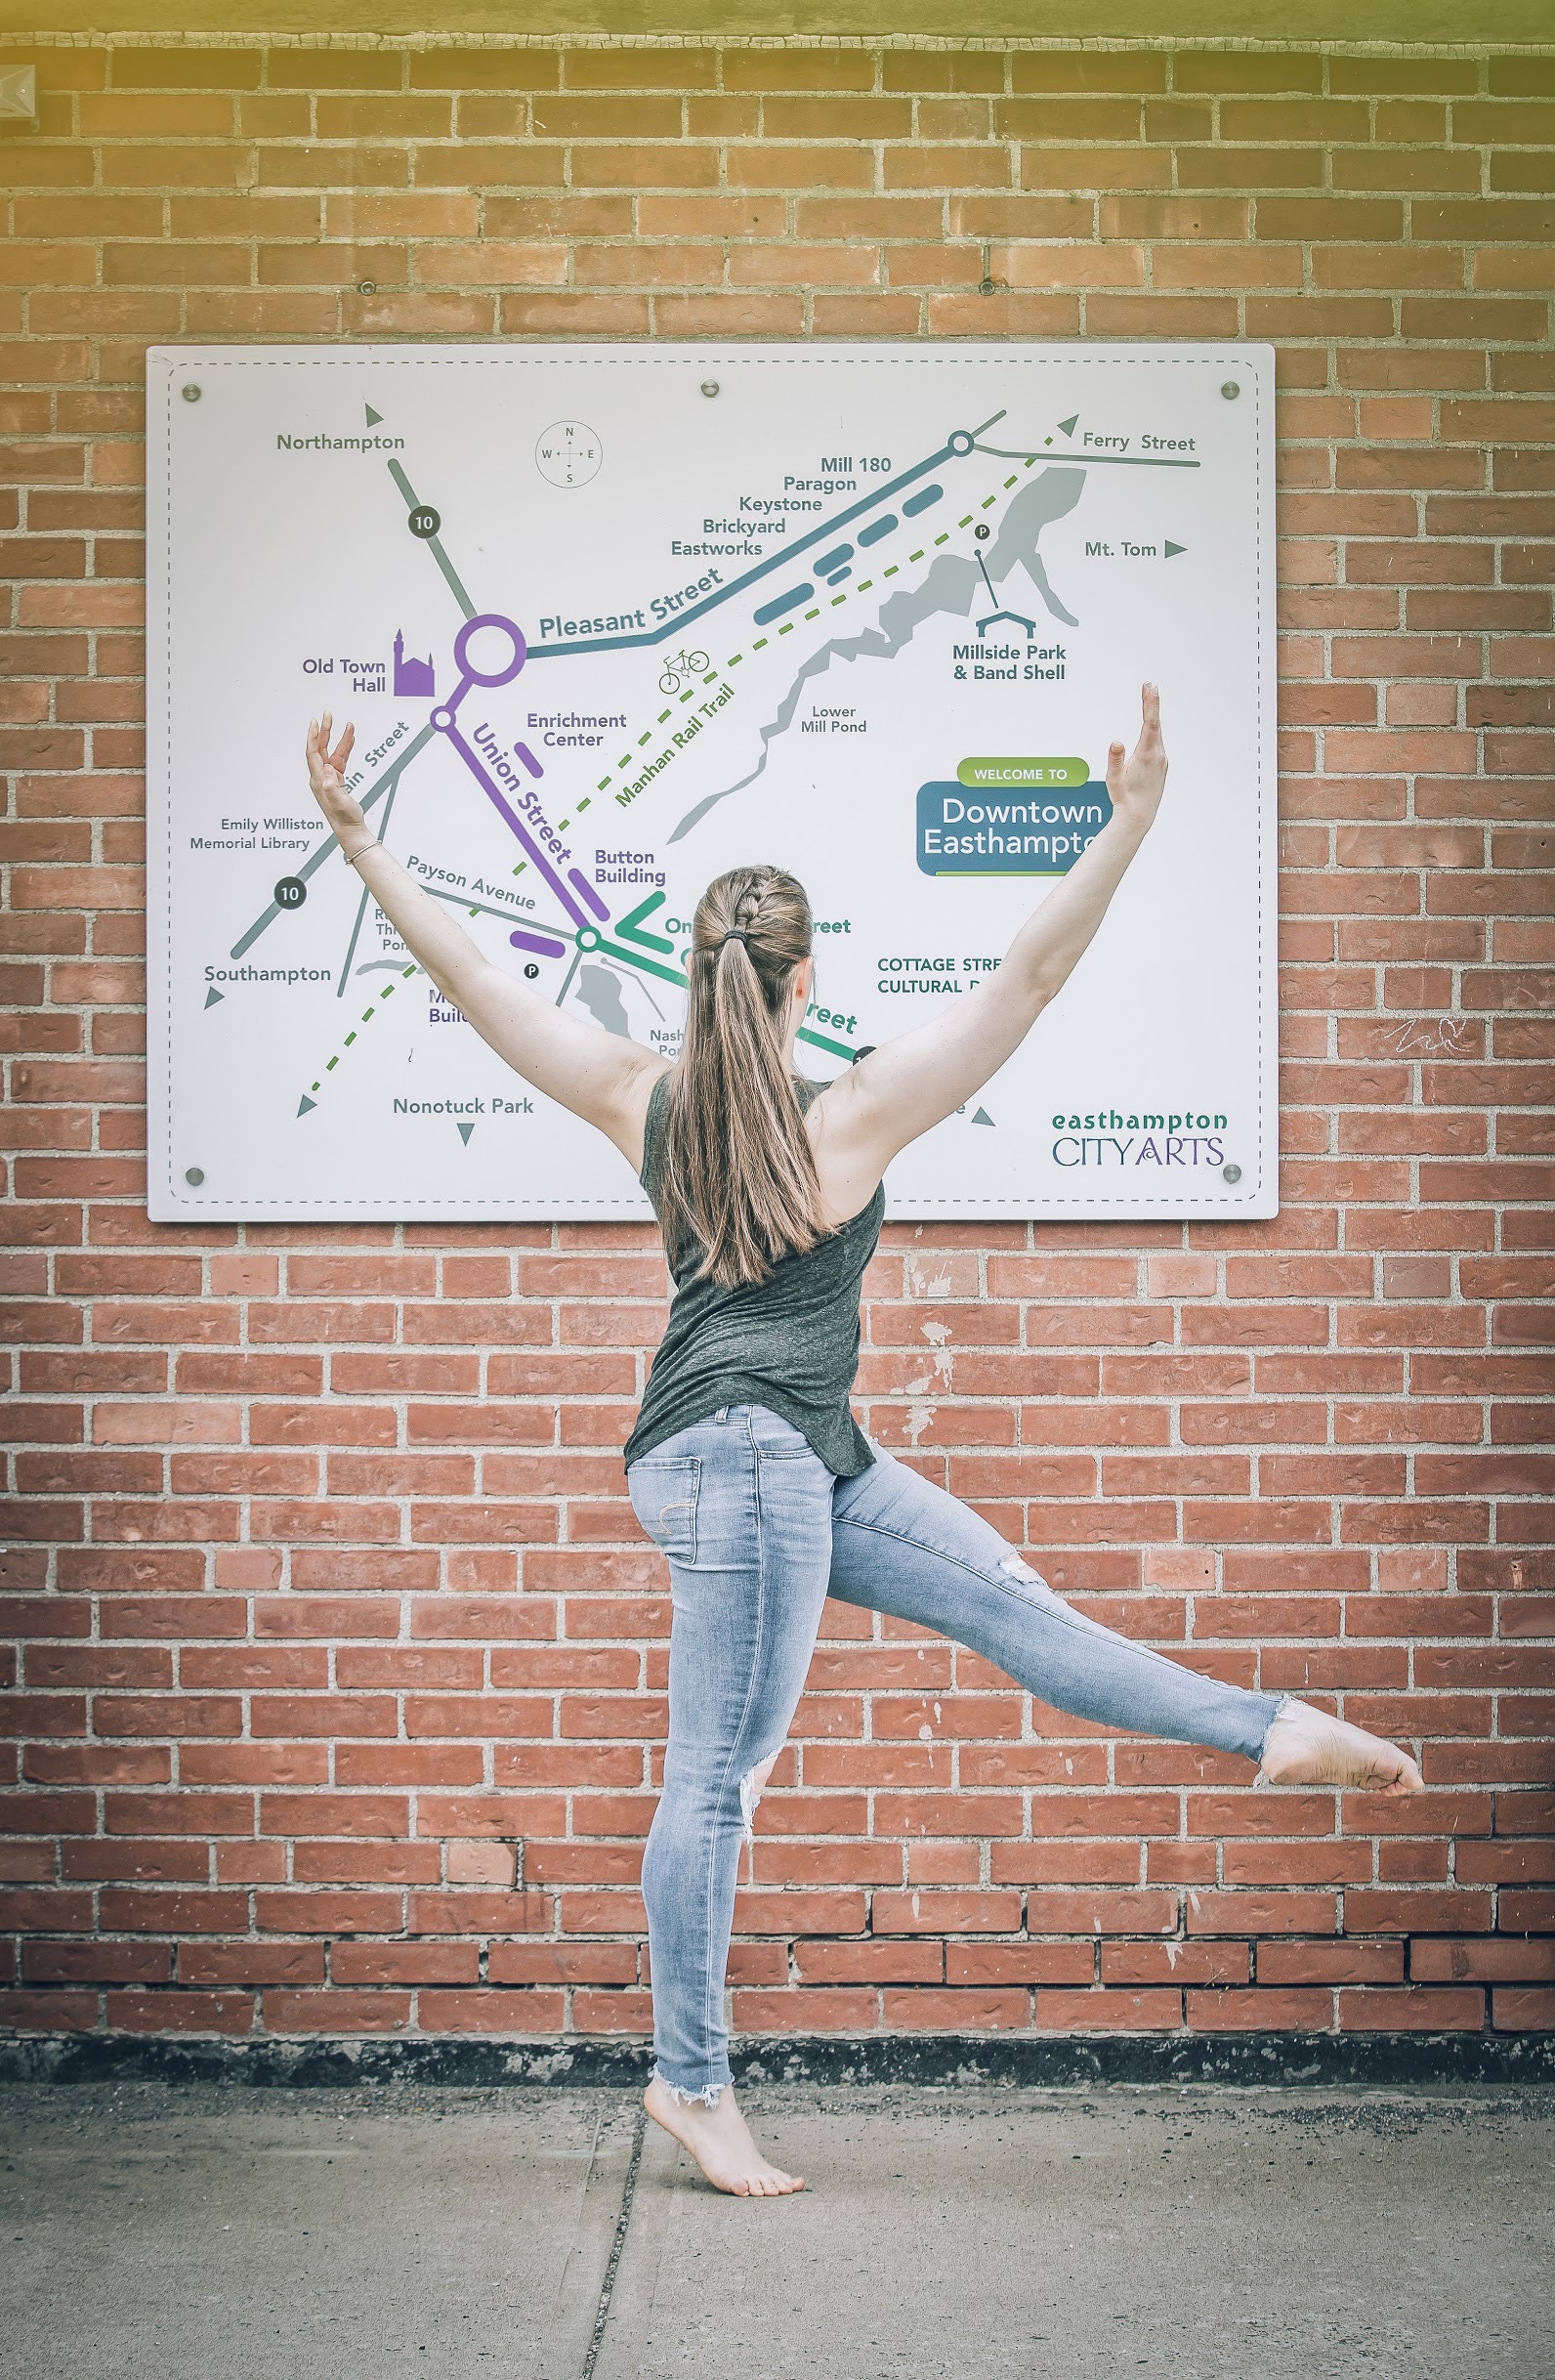 Dancer in front of map of downtown Easthampton